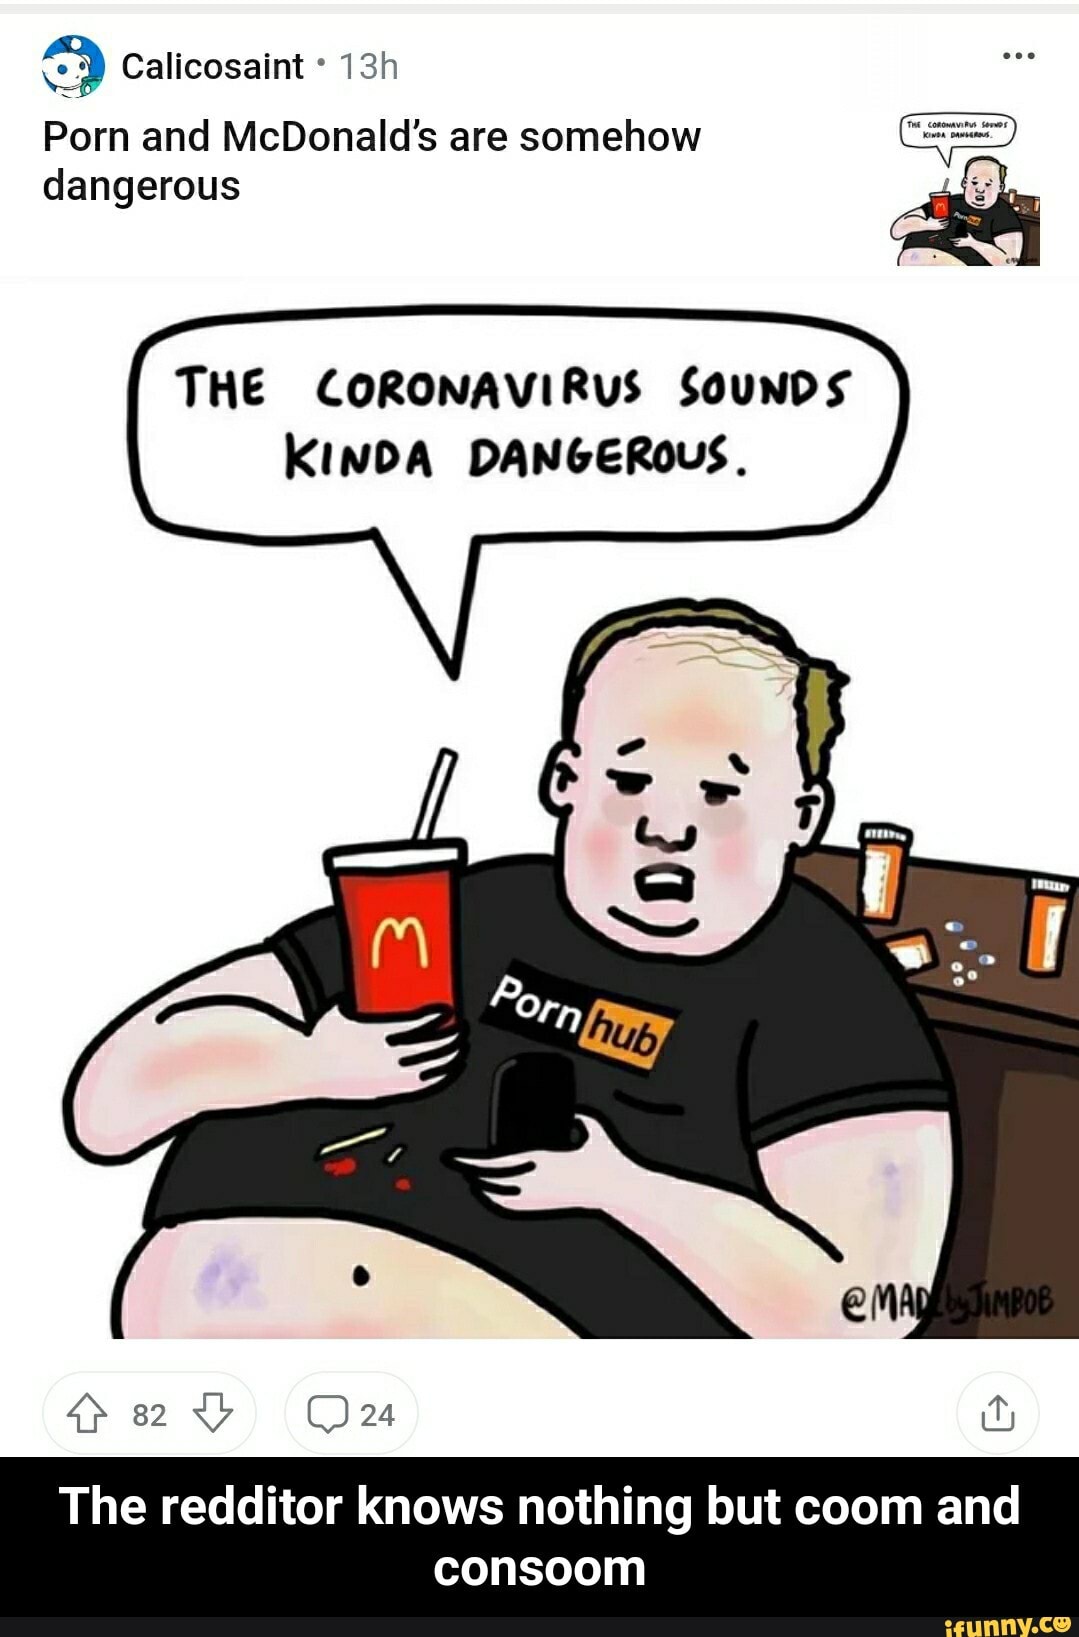 Coom - Calicosaint Porn and McDonald's are somehow dangerous THE CORONAVIRUS  SouNDS KINDA DANGEROUS. The redditor knows nothing but coom and consoom -  The redditor knows nothing but coom and consoom - iFunny